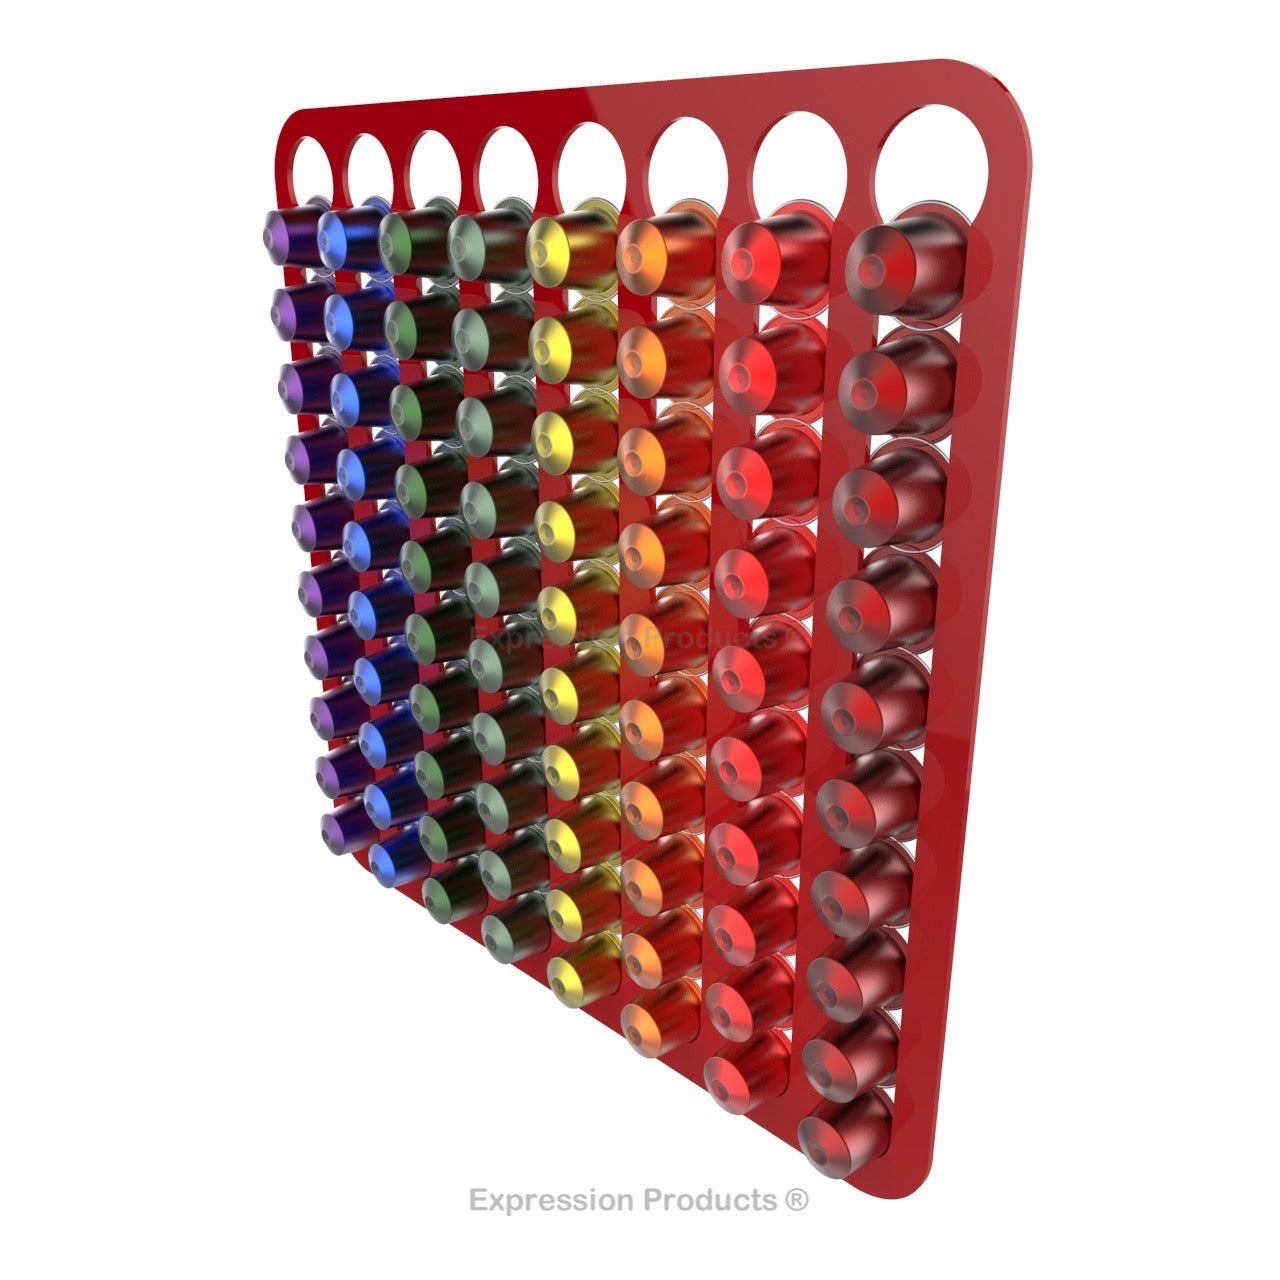 Magnetic Nespresso Original Line coffee pod holder shown in red holding 80 pods